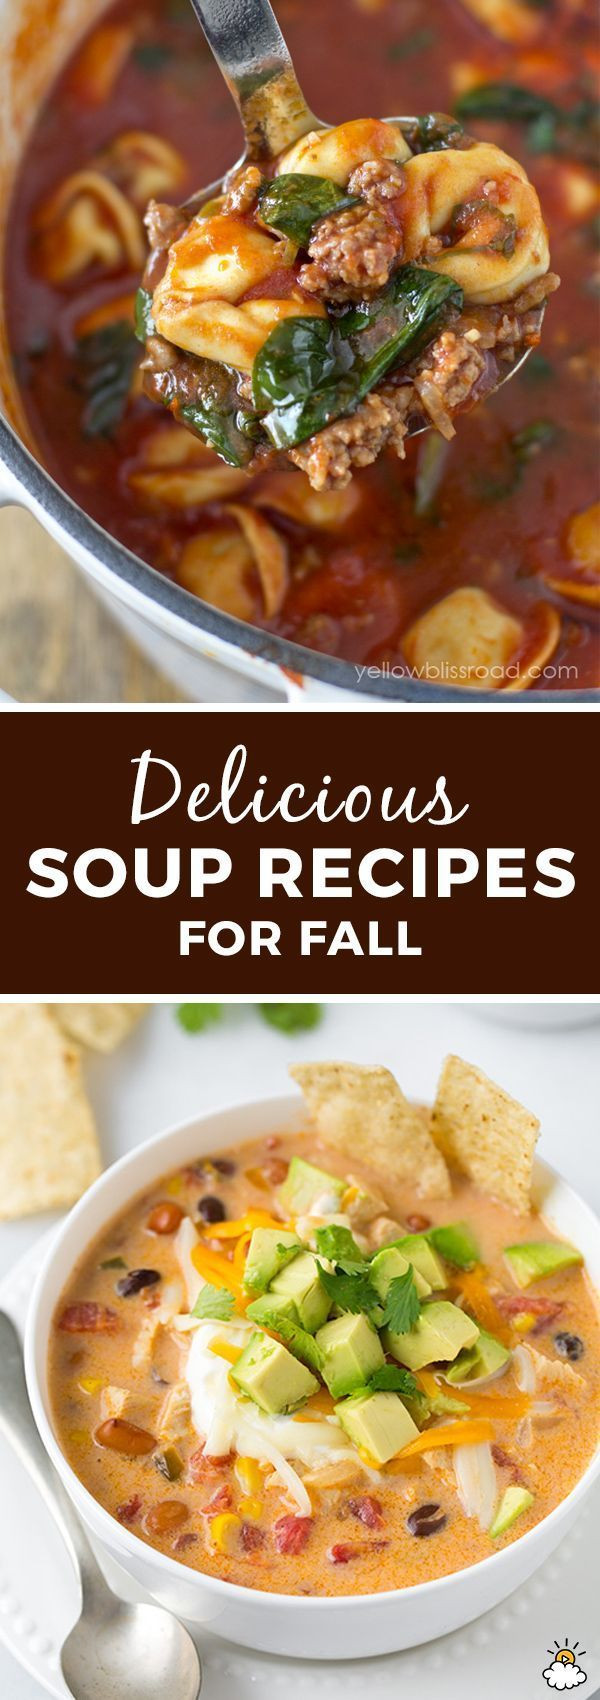 Healthy Fall Soups
 The 15 Most Delicious Fall Soups